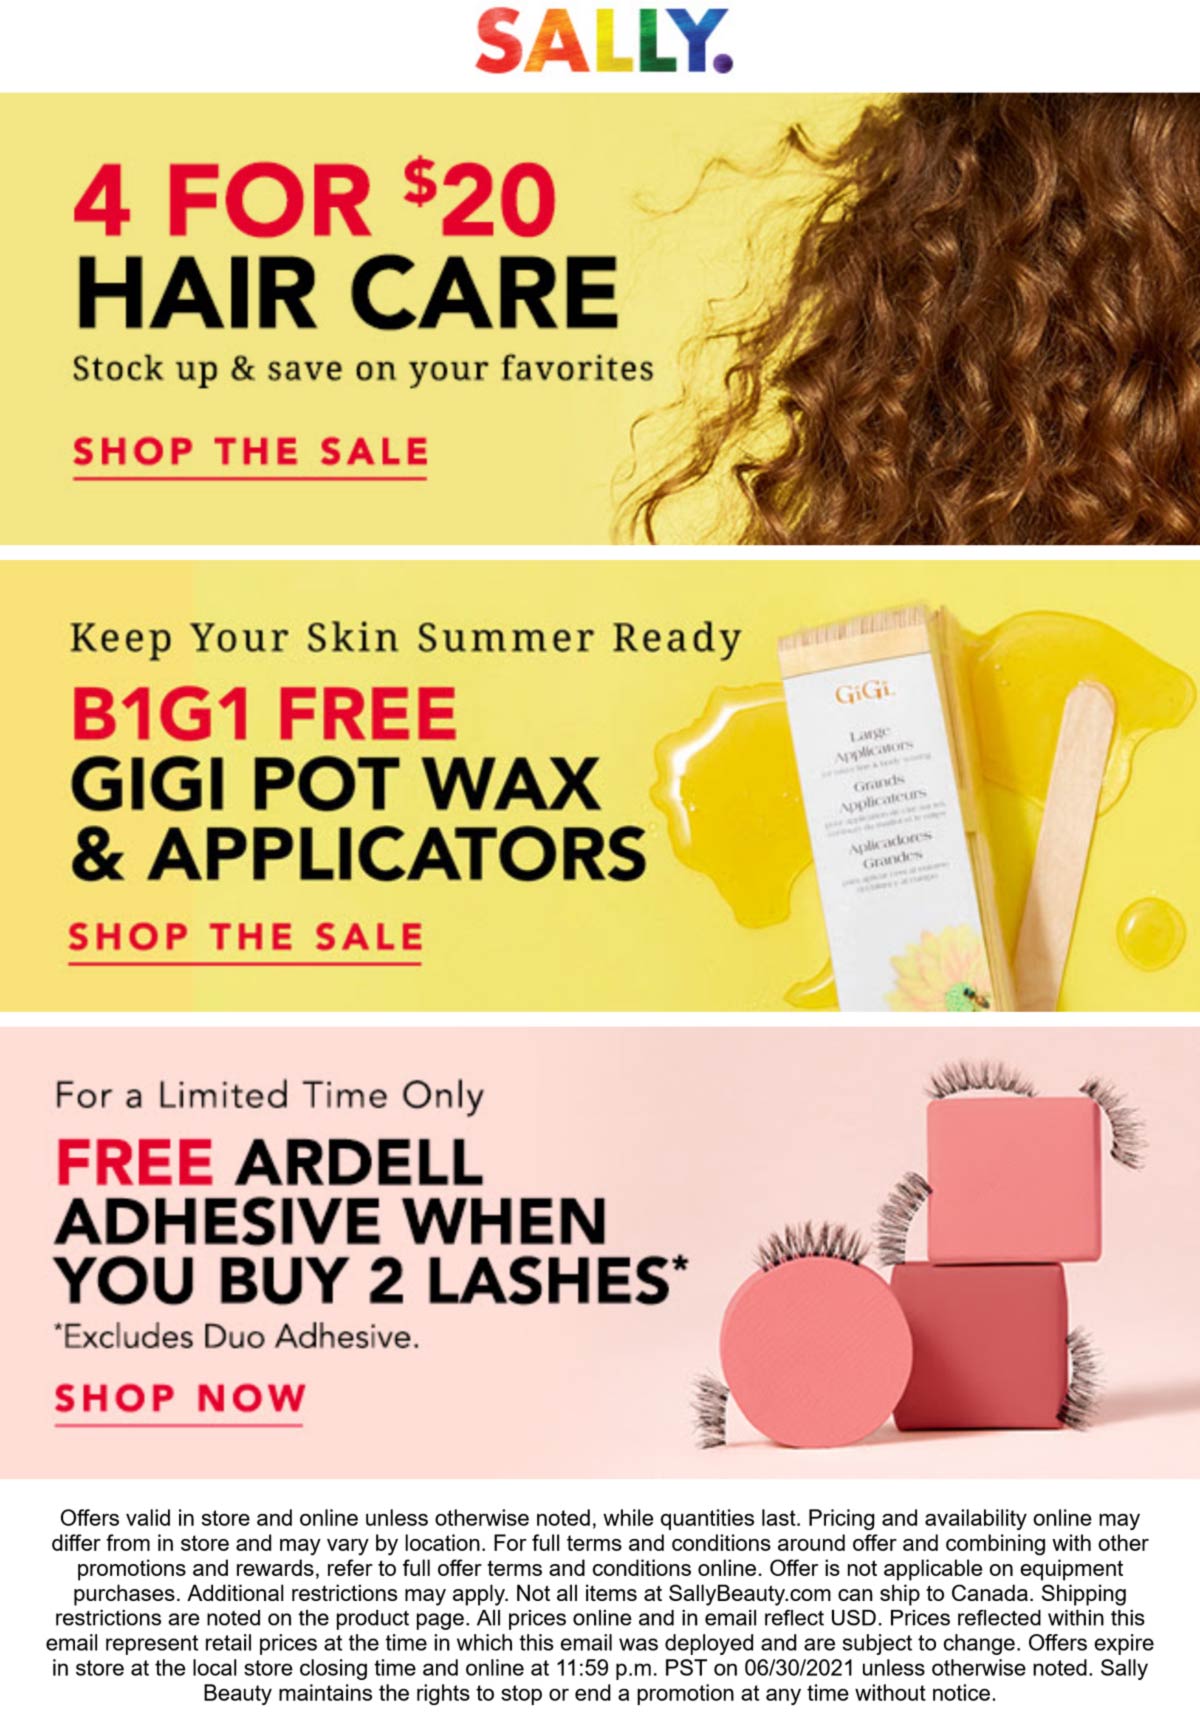 Sally Beauty stores Coupon  Hair care is 4 for $20 at Sally Beauty, ditto online #sallybeauty 